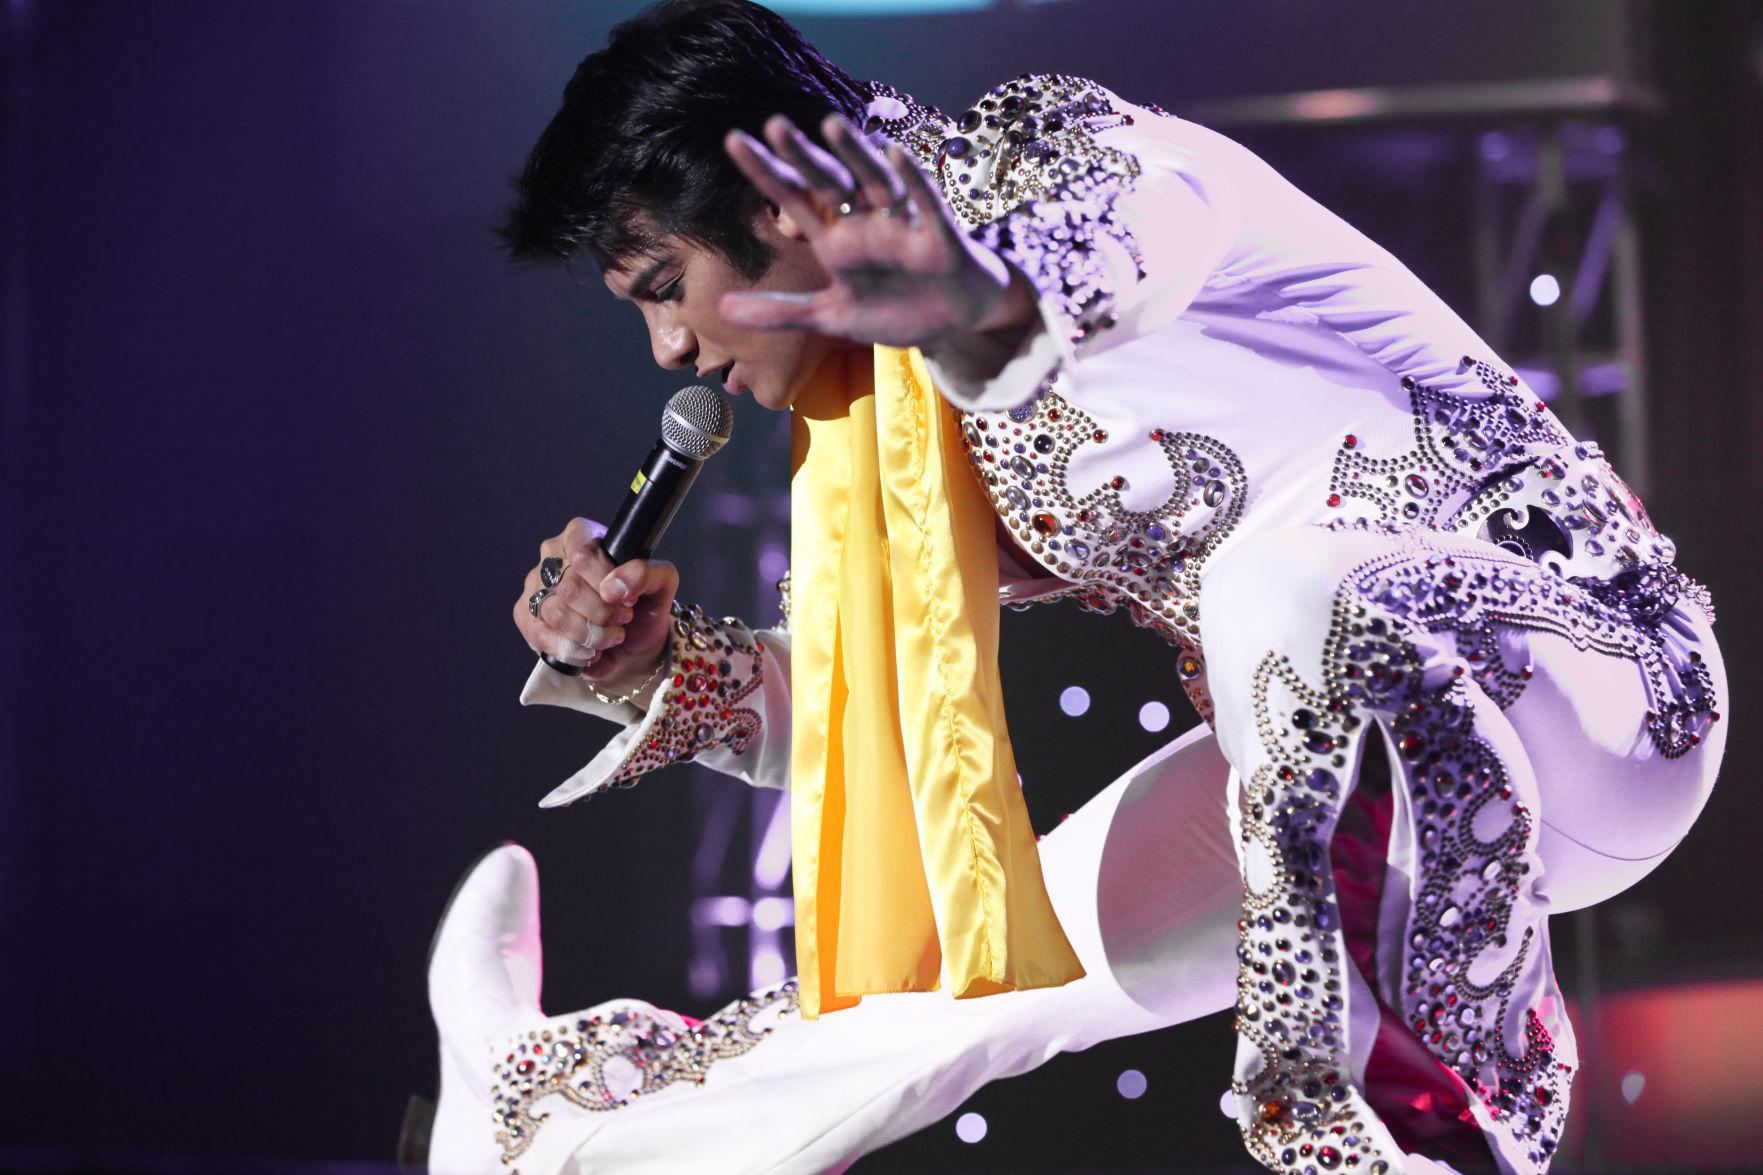 Hail to 'the king' Hall bringing his Elvis show back to Schuyler